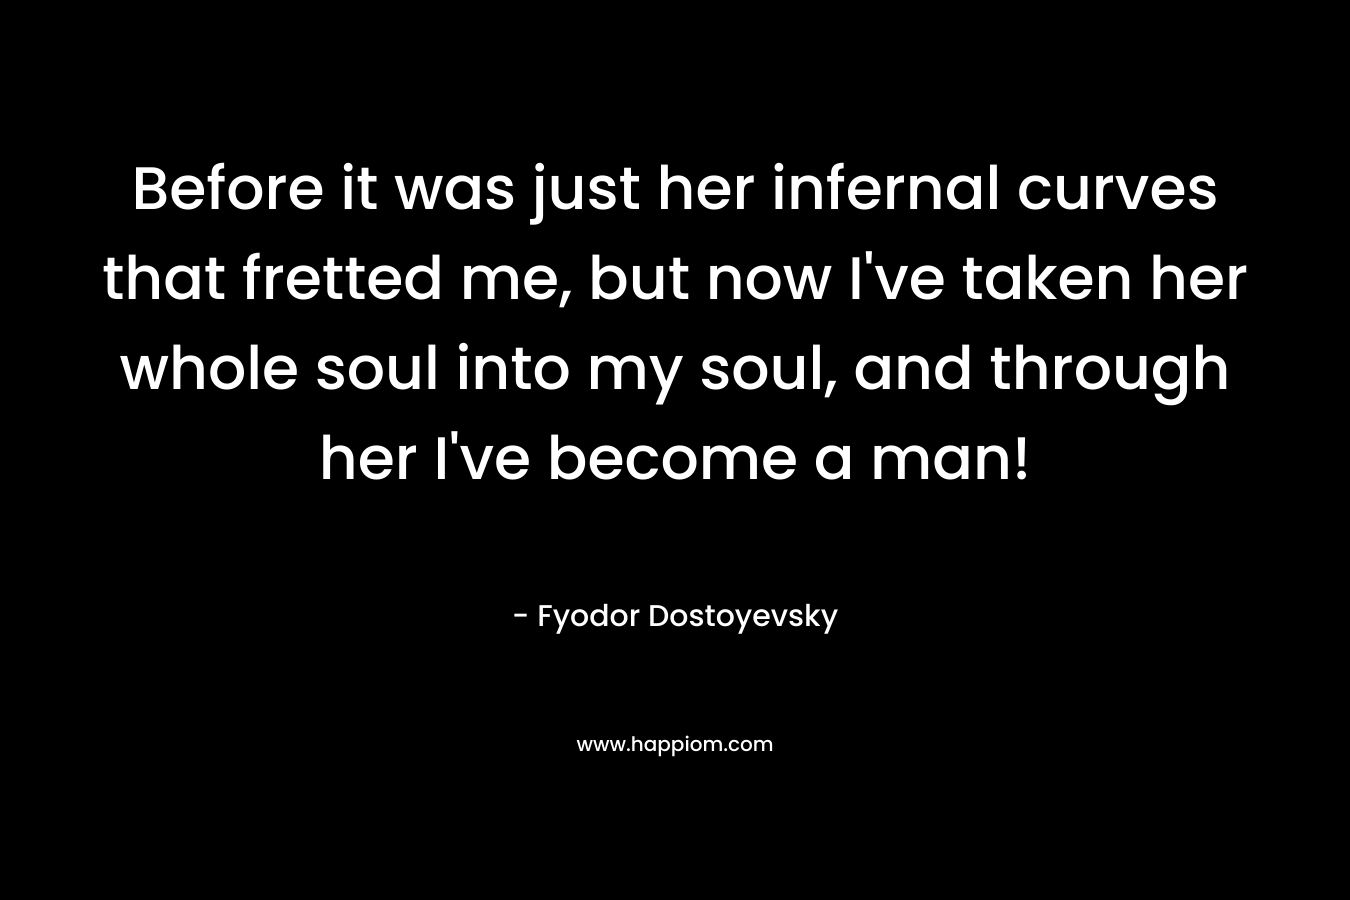 Before it was just her infernal curves that fretted me, but now I’ve taken her whole soul into my soul, and through her I’ve become a man! – Fyodor Dostoyevsky